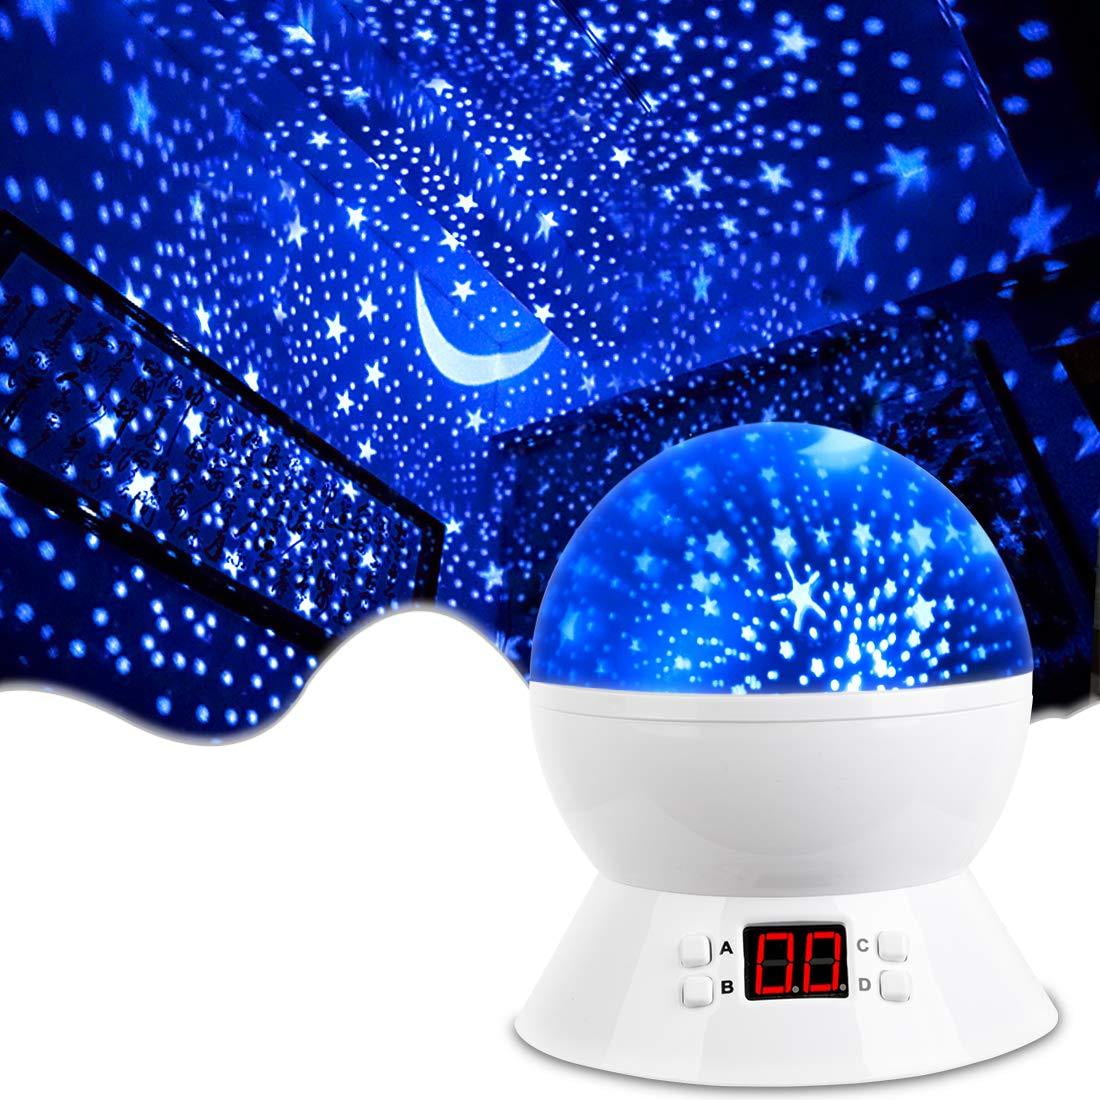 Room Lights for Kids Glow in The Dark Stars and Moon can Make Child Sleep Peacefully and Best Gift-Pink MOKOQI Star Projector Night Lights for Kids with Timer Gifts for 1-14 Year Old Girl and Boy